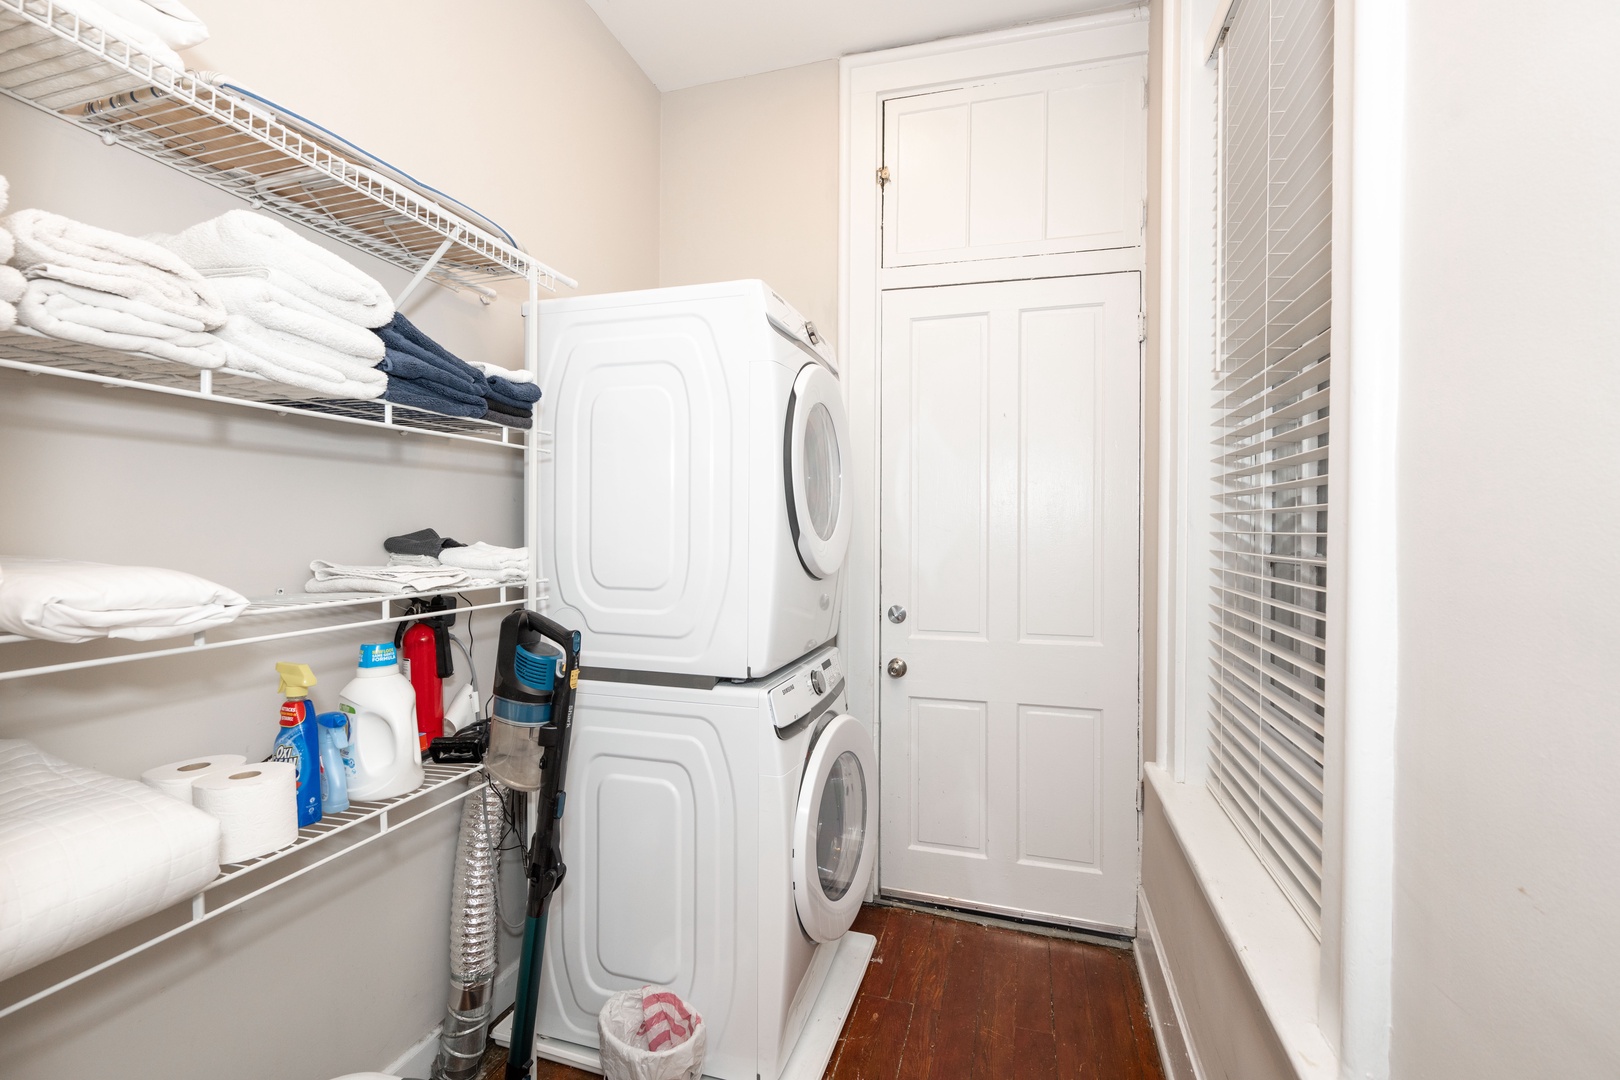 Private laundry is available for your stay, tucked away off the loft sleeping area